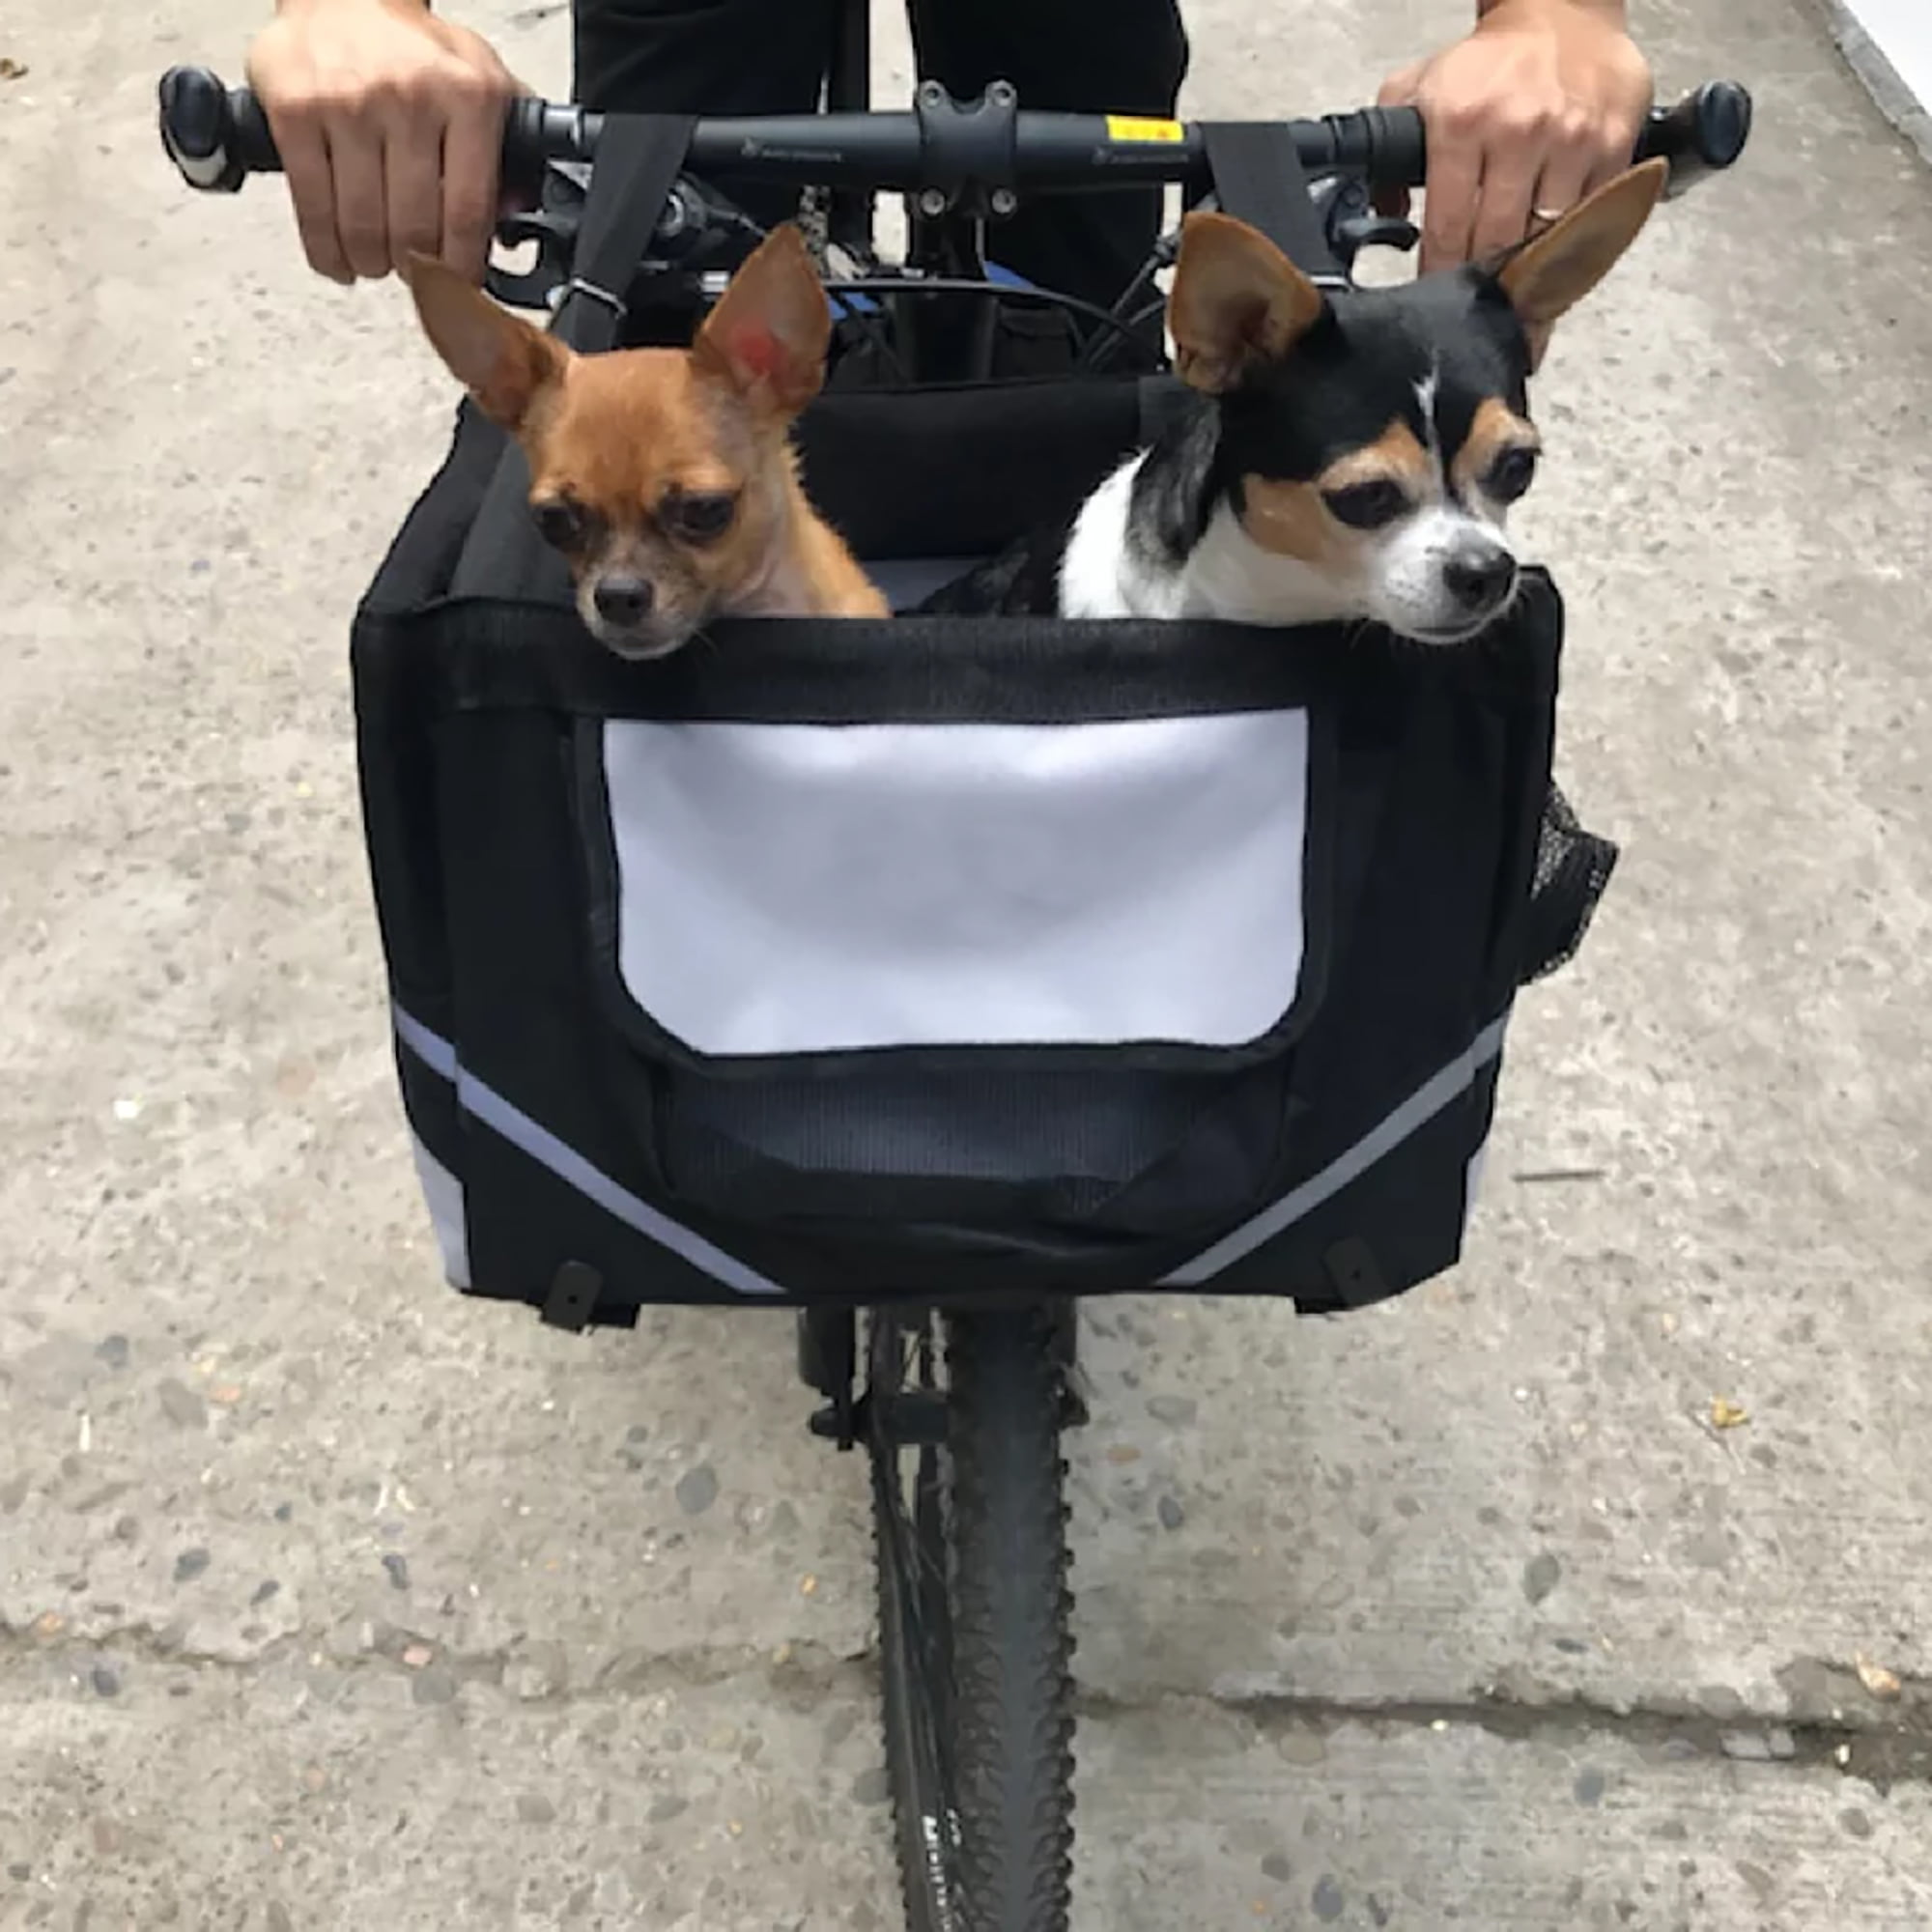 front dog carriers small dogs